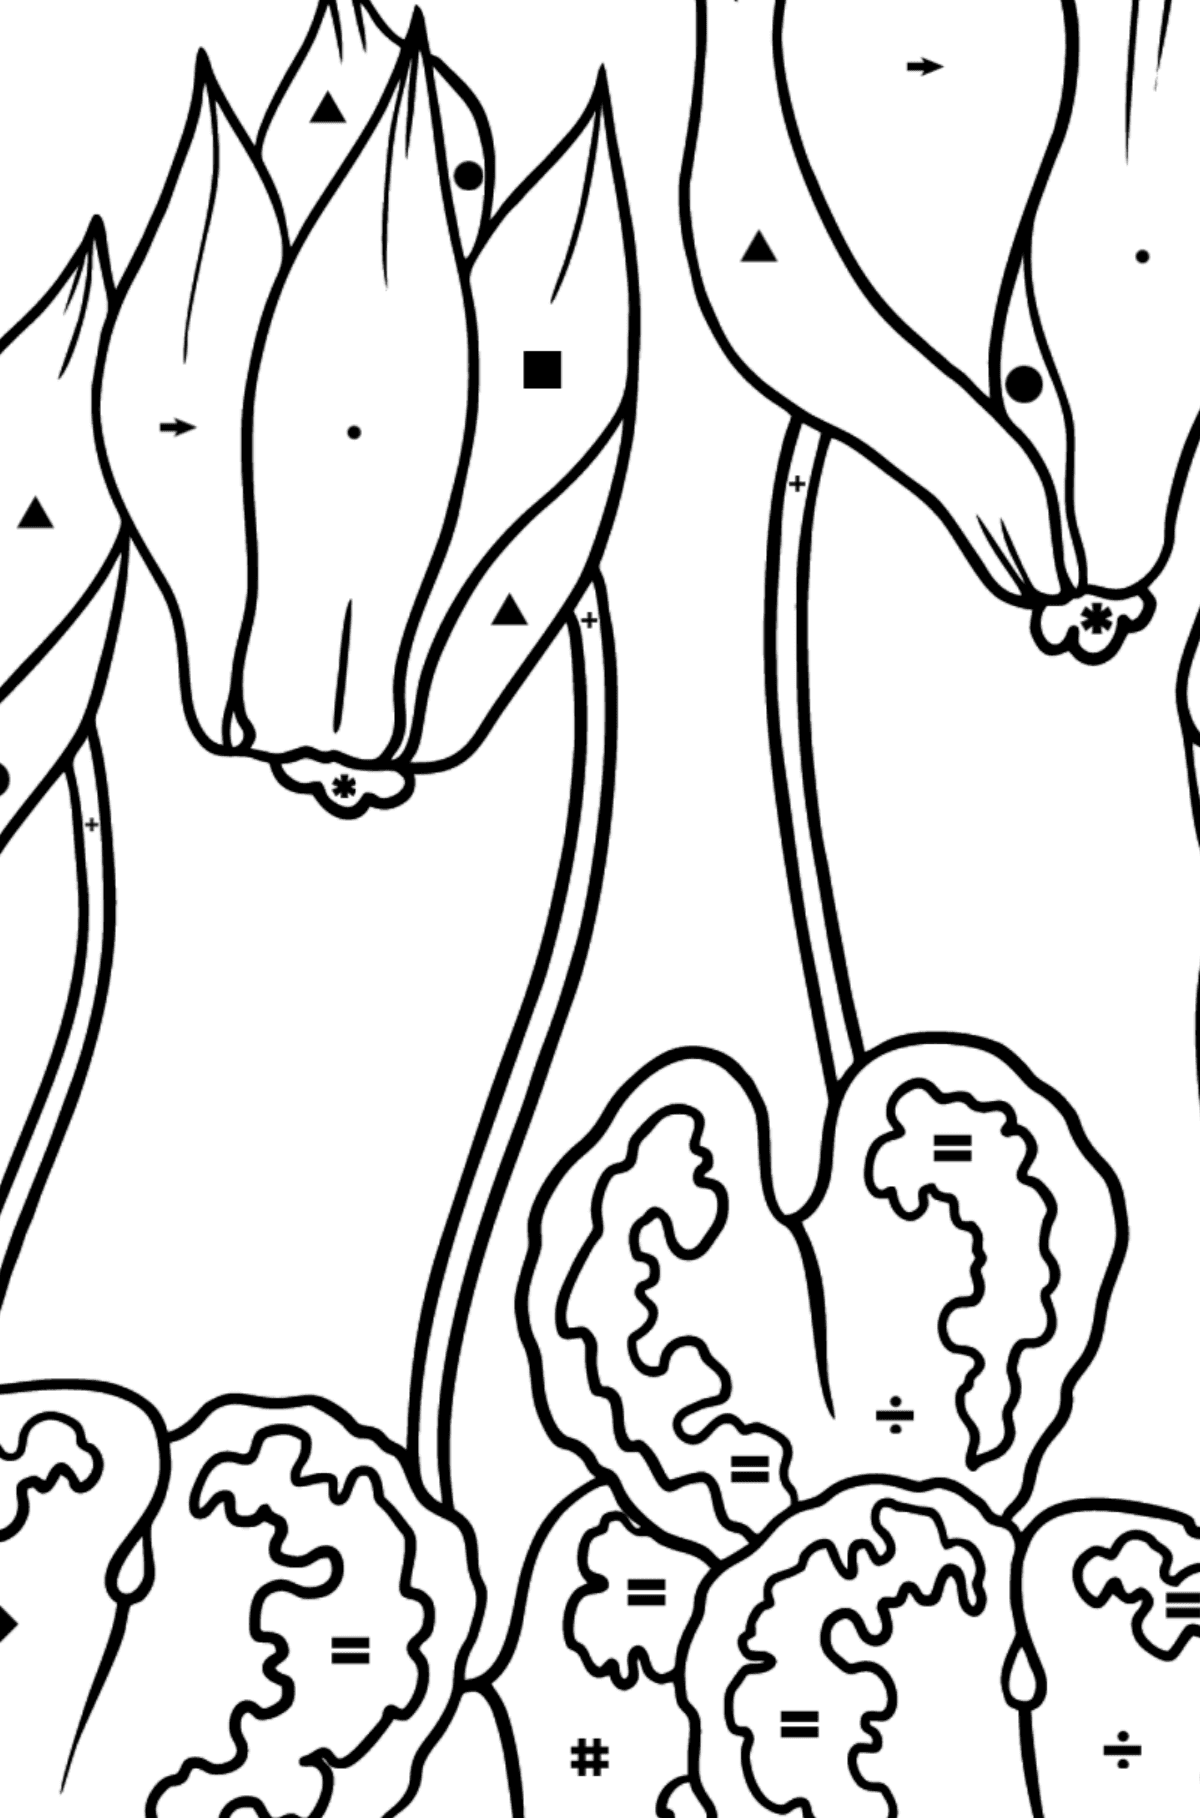 Red Cyclamen Coloring Page - Coloring by Symbols for Kids